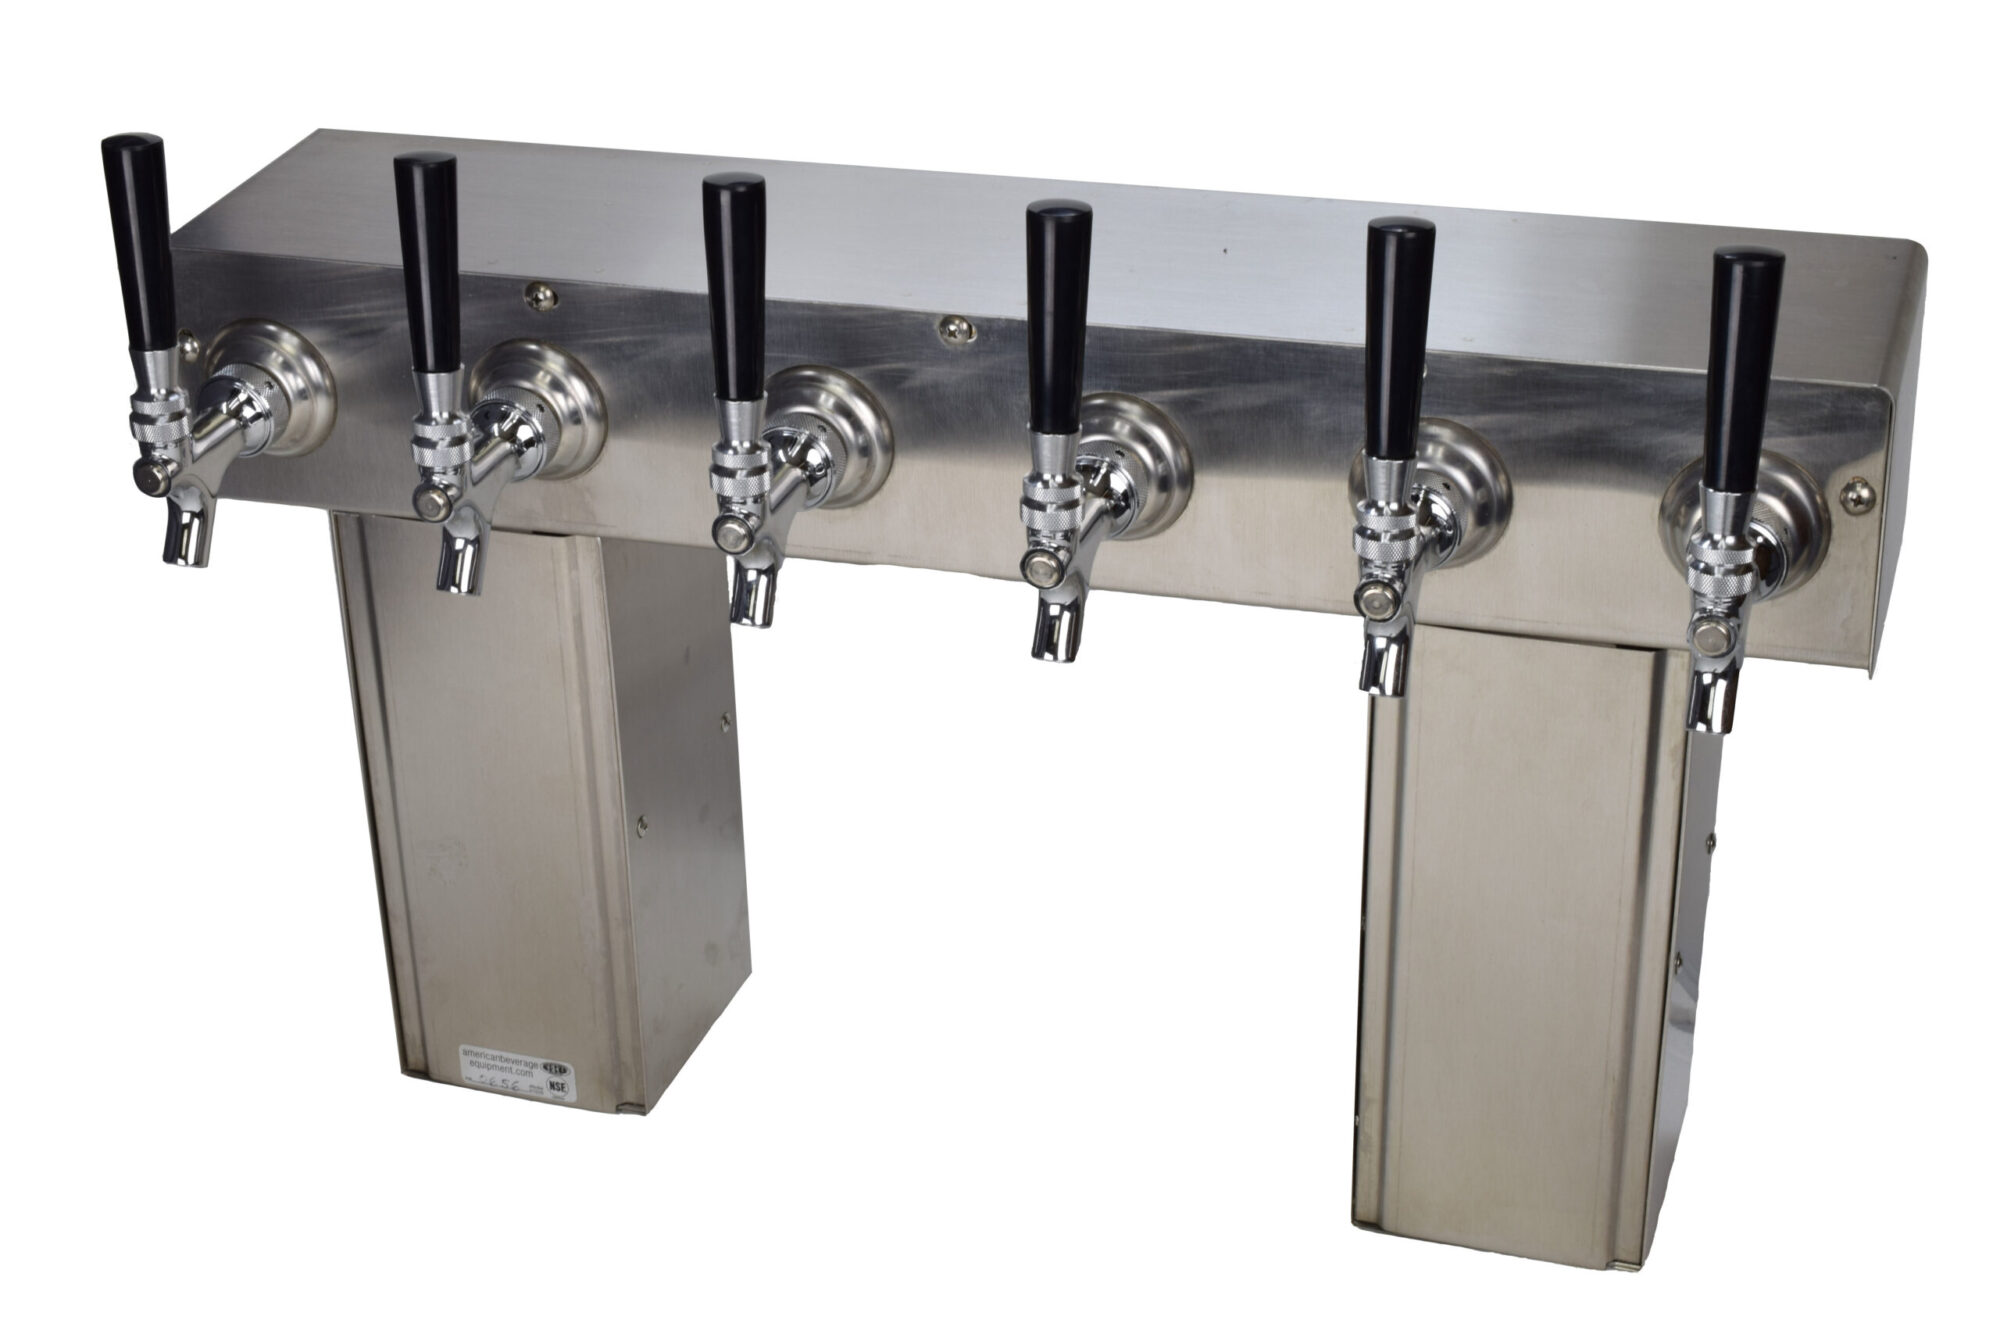 656-SS Six Faucet Pass Through Tower with Square Bases - Stainless Steel Faucets and Shanks